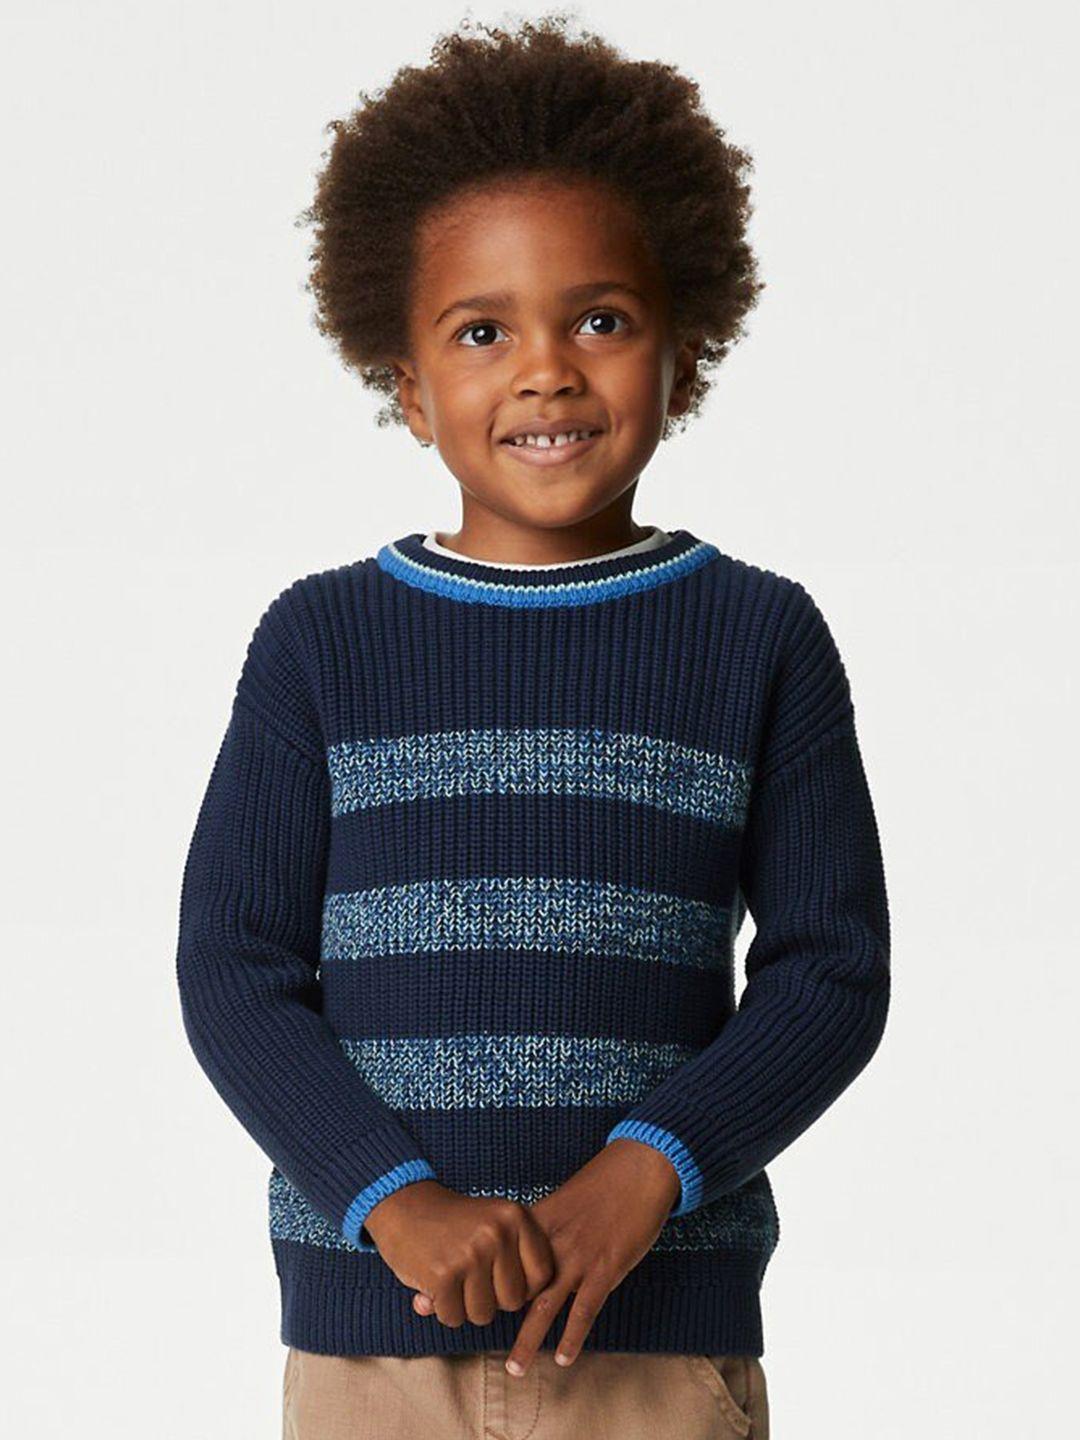 marks & spencer boys striped pure cotton pullover sweater